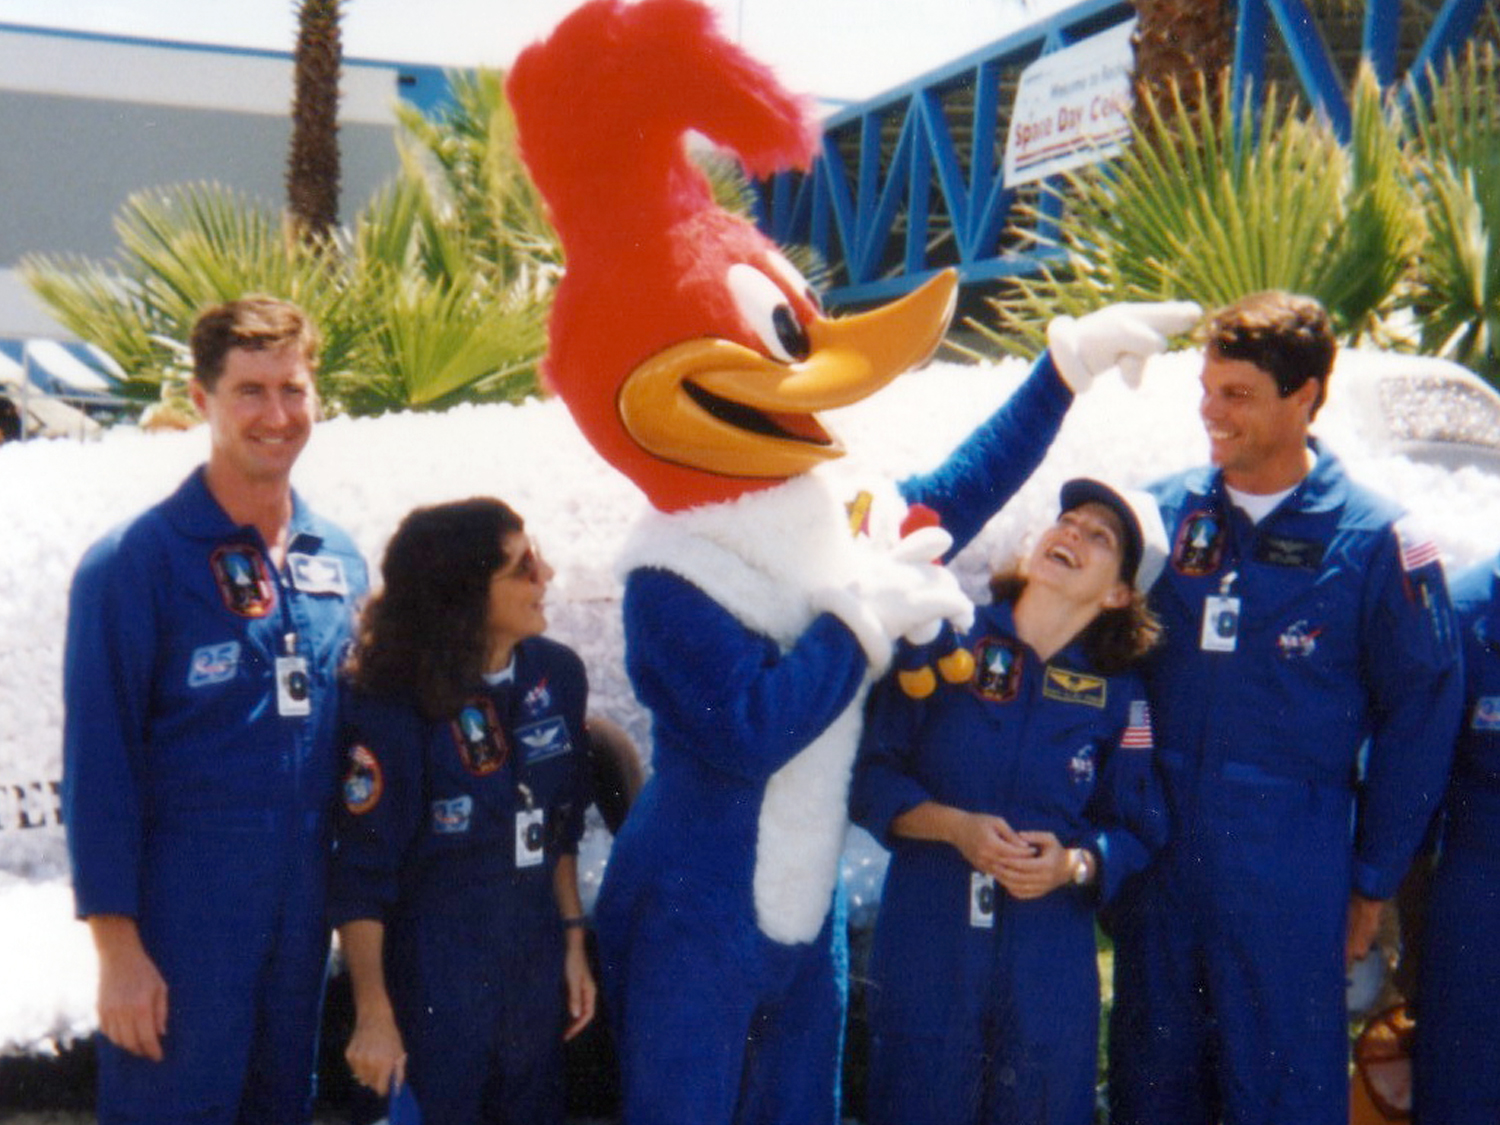  Meeting Woody Woodpecker at KSC after the mission.&nbsp;(photo by Charles Atkeison IV) 